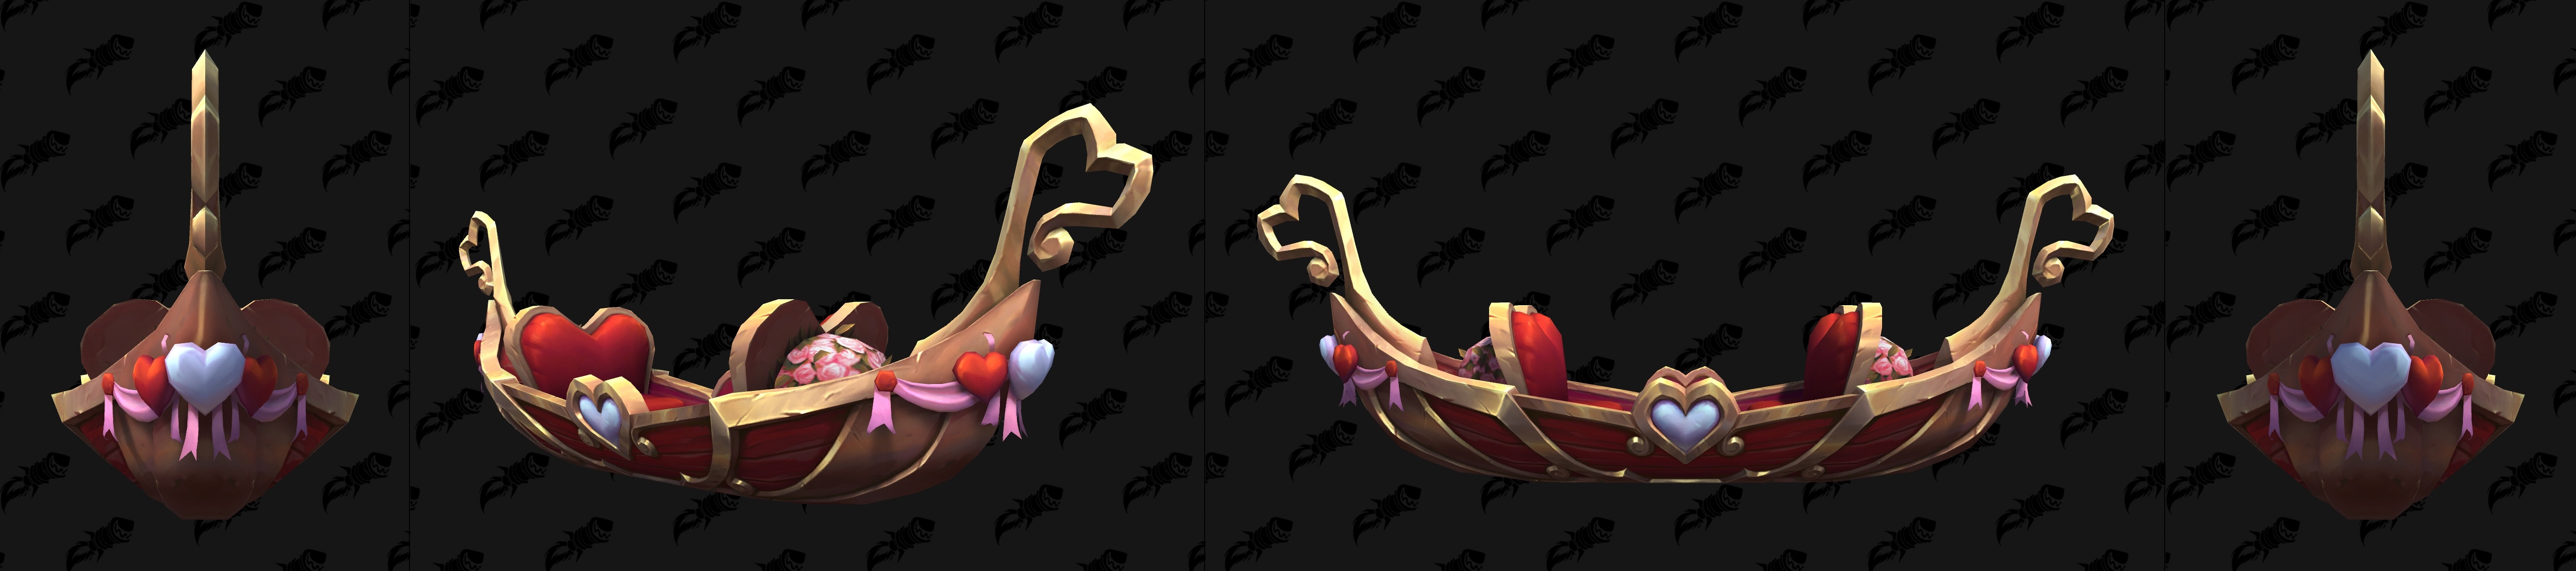 The Love is in the Air - Change and New reward! : r/wow